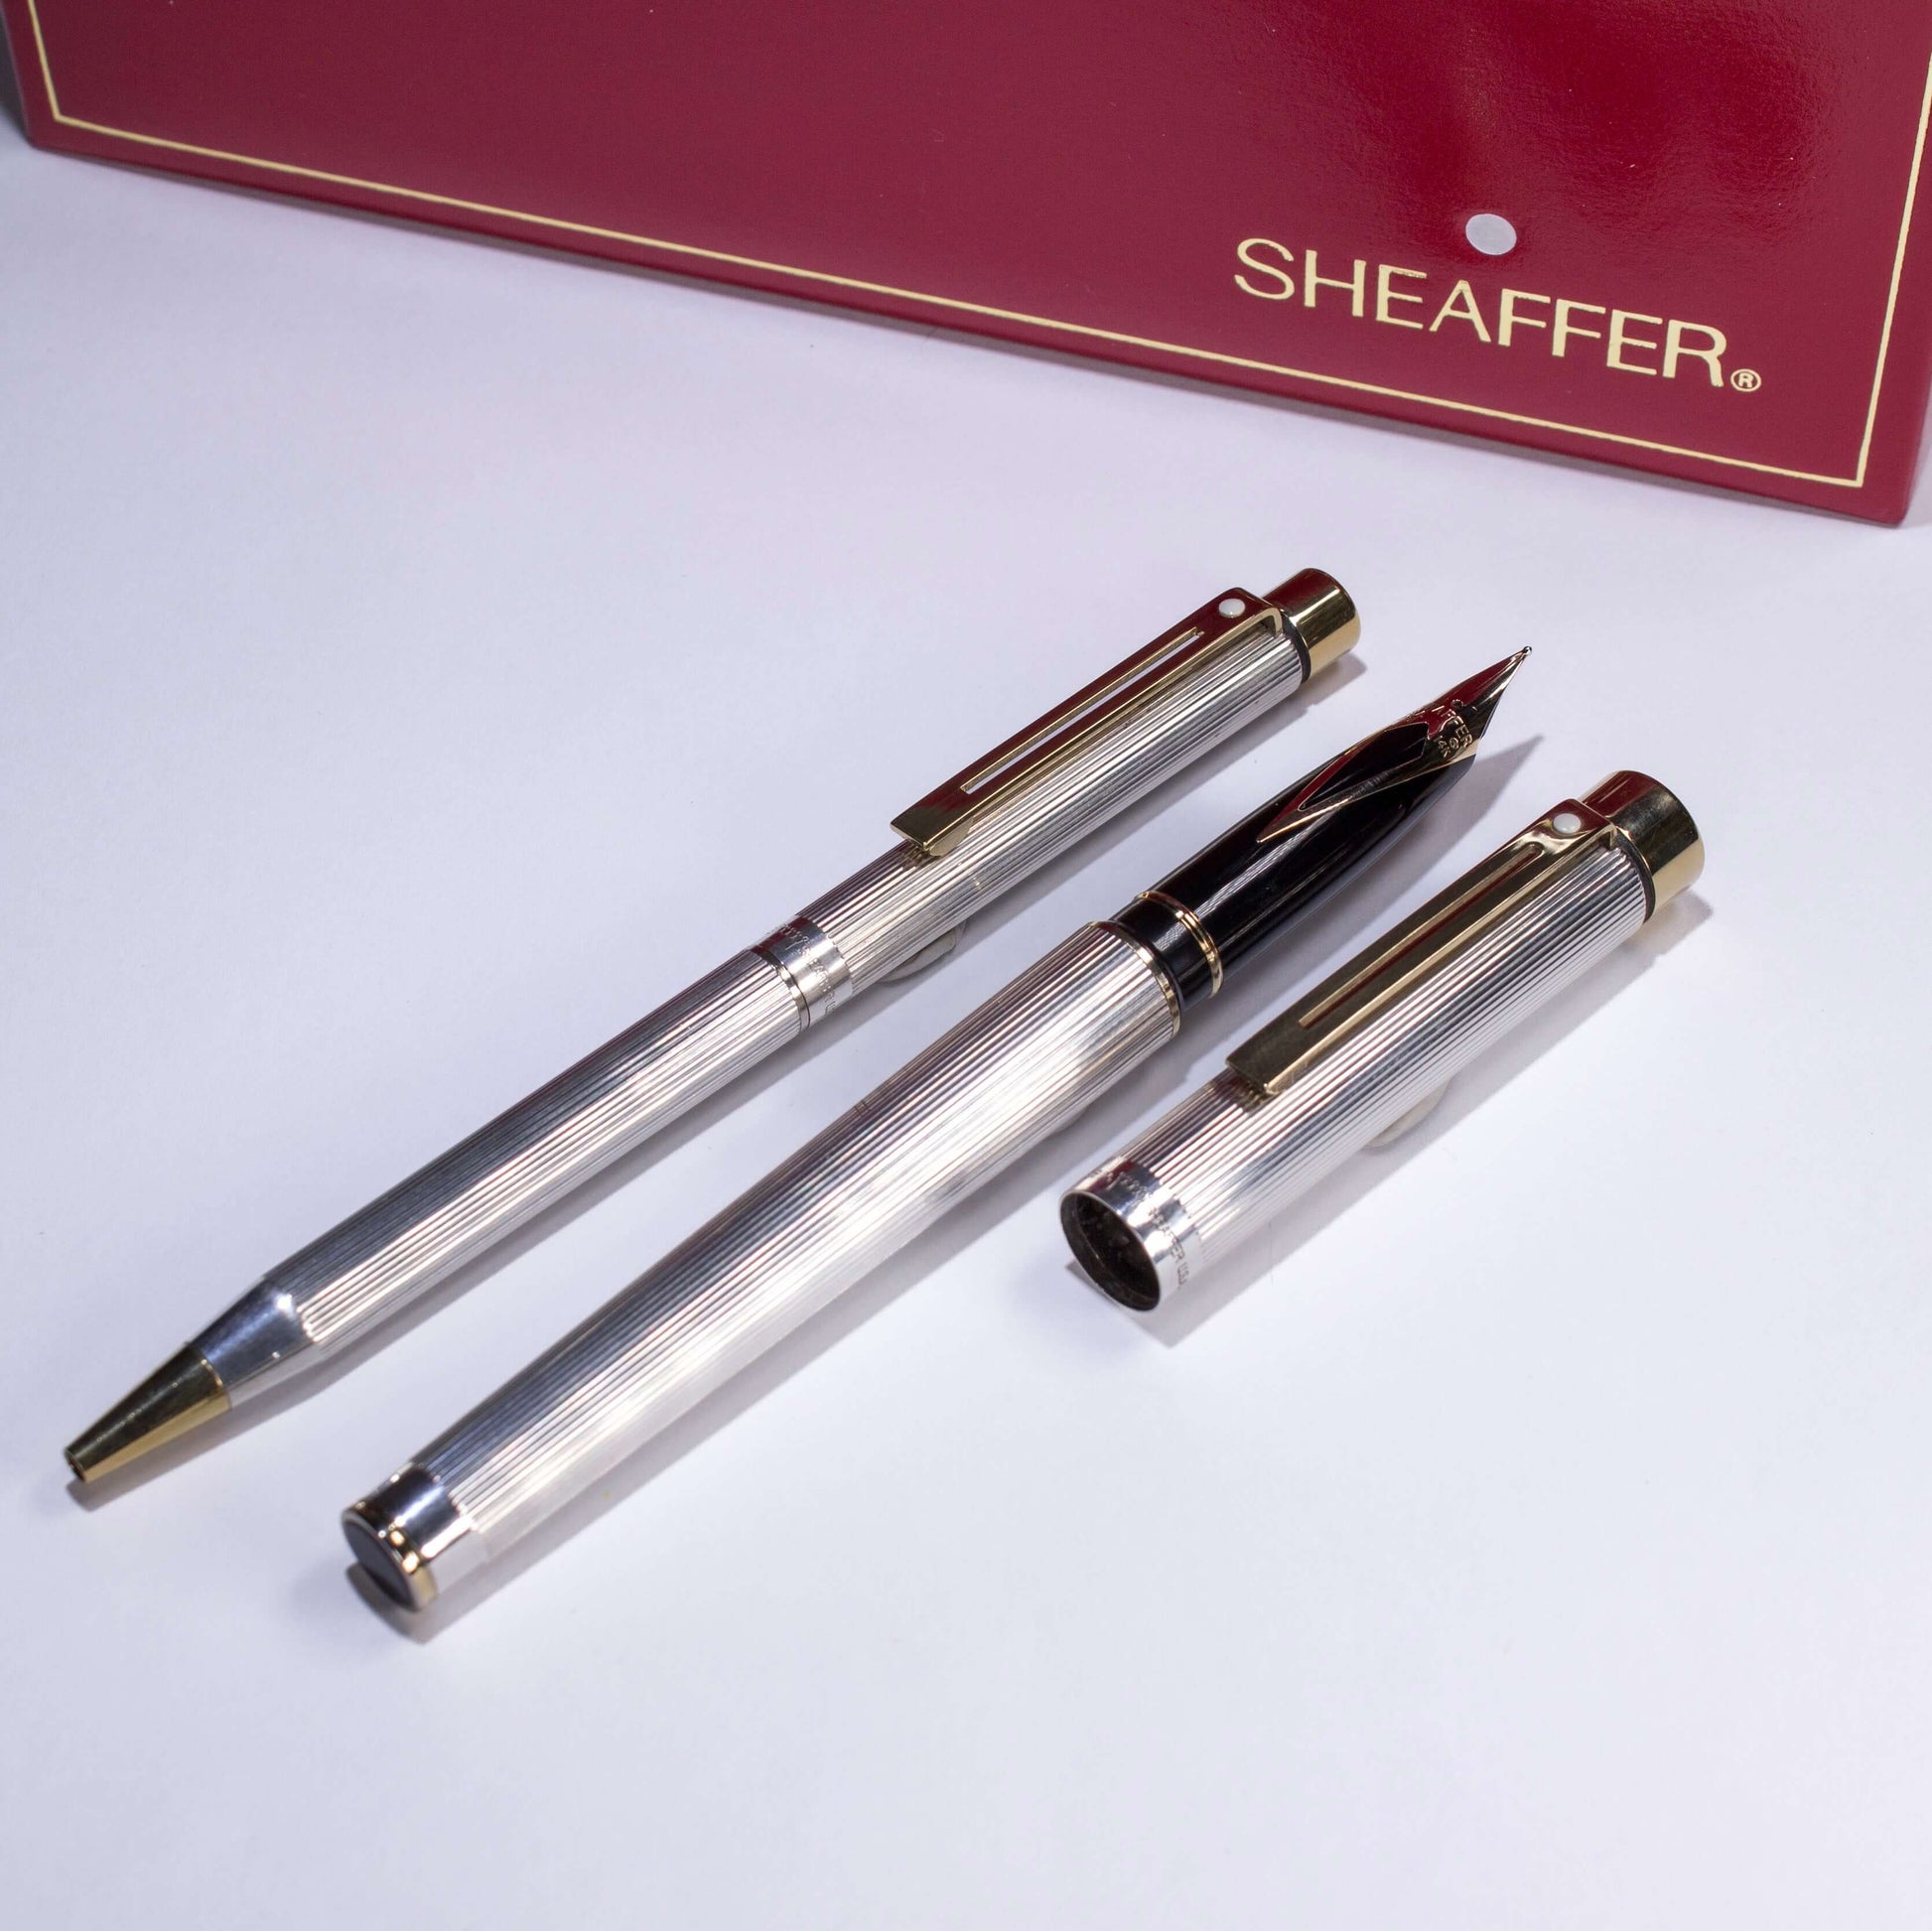 ${titleName/Type: Sheaffer Targa Fountain Pen/Ballpoint Set Manufacture Year: 1988 - 1996 Length: 5 3/8 Filling System: Cartridge/Converter, Converter included Color/Pattern: Sterling Silver Hallmarked Nib Type/Condition and remarks: Medium Inlaid 14K nib